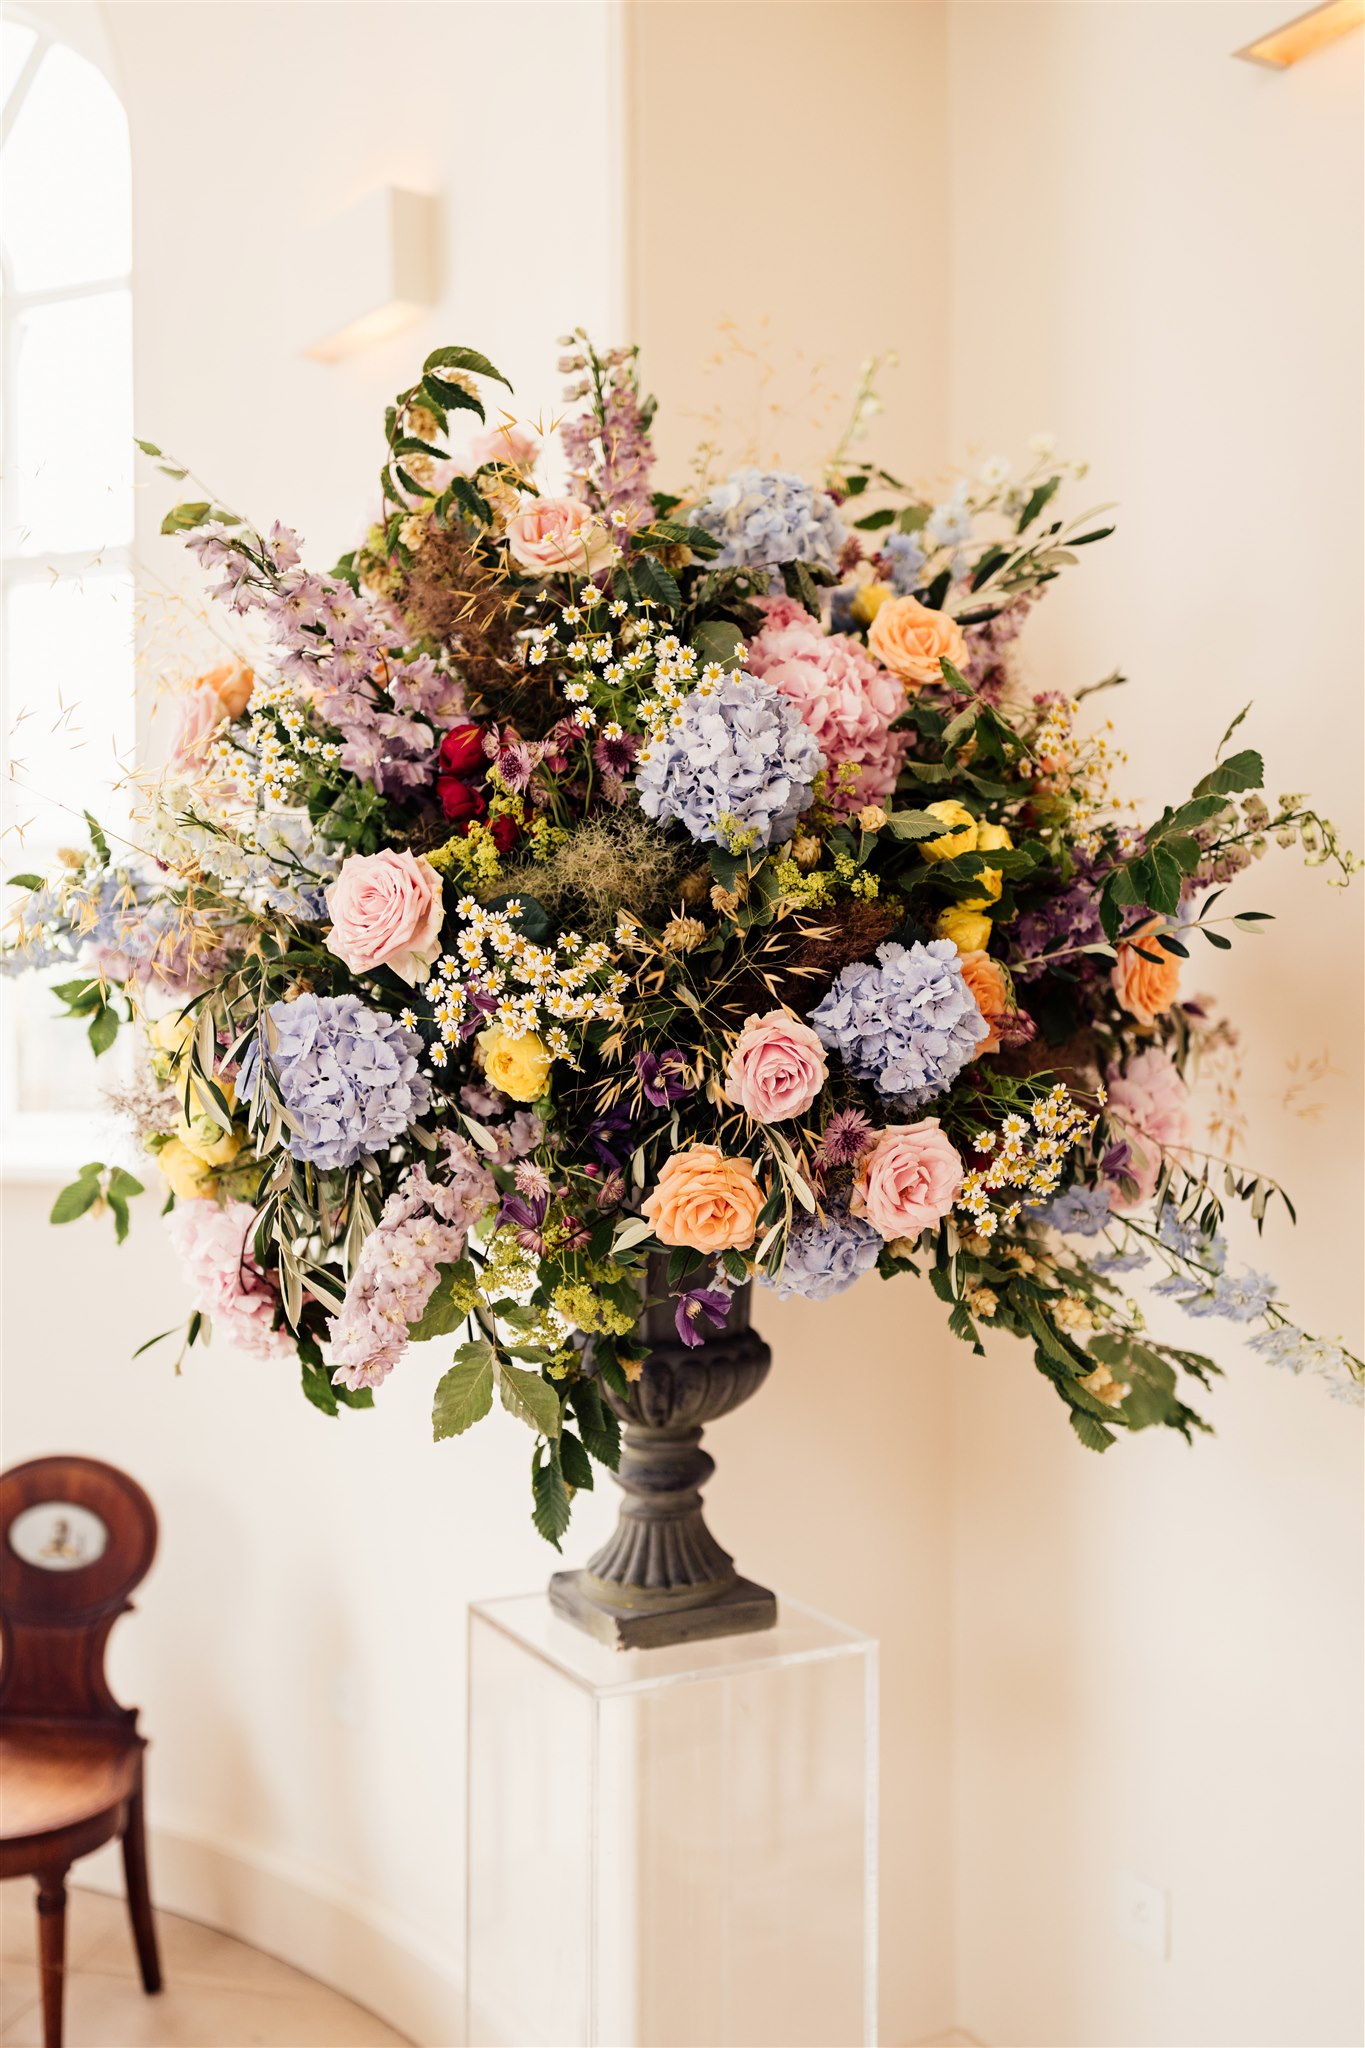 A large urn filled with floral arrangements filled with green foliage and pink, blue and lilac tones set on a plinth in a neutral room